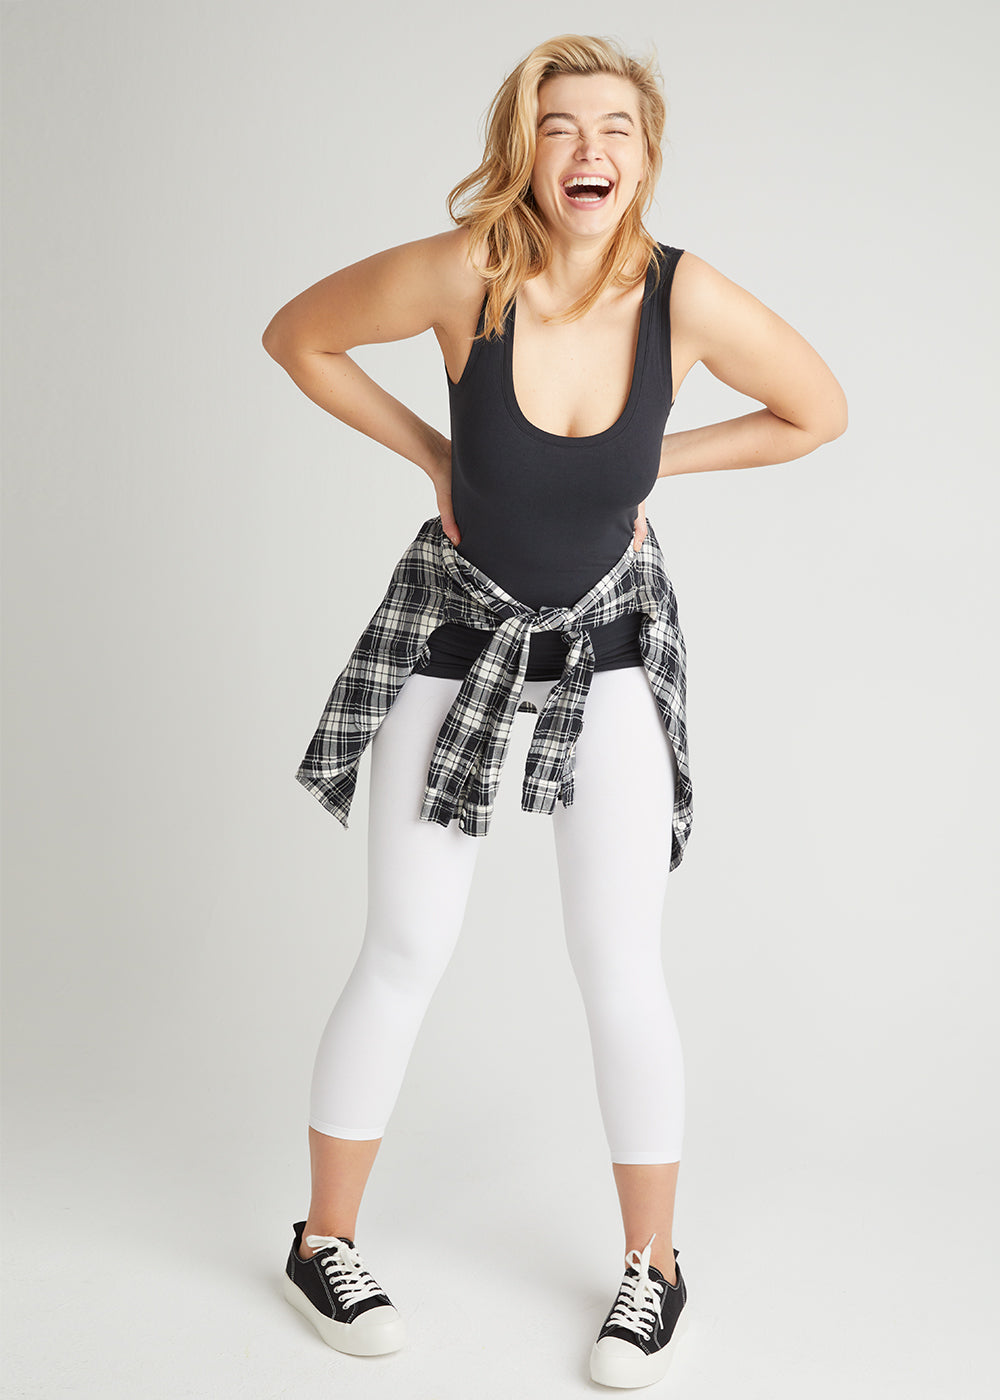 non-shaping tank - cotton seamless in Black,  gloria 7/8 ankle shaping legging - cotton stretch in White and a White & Black Plaid shirt worn by a woman standing facing forward hands at waist and bending slightly forward Yummie